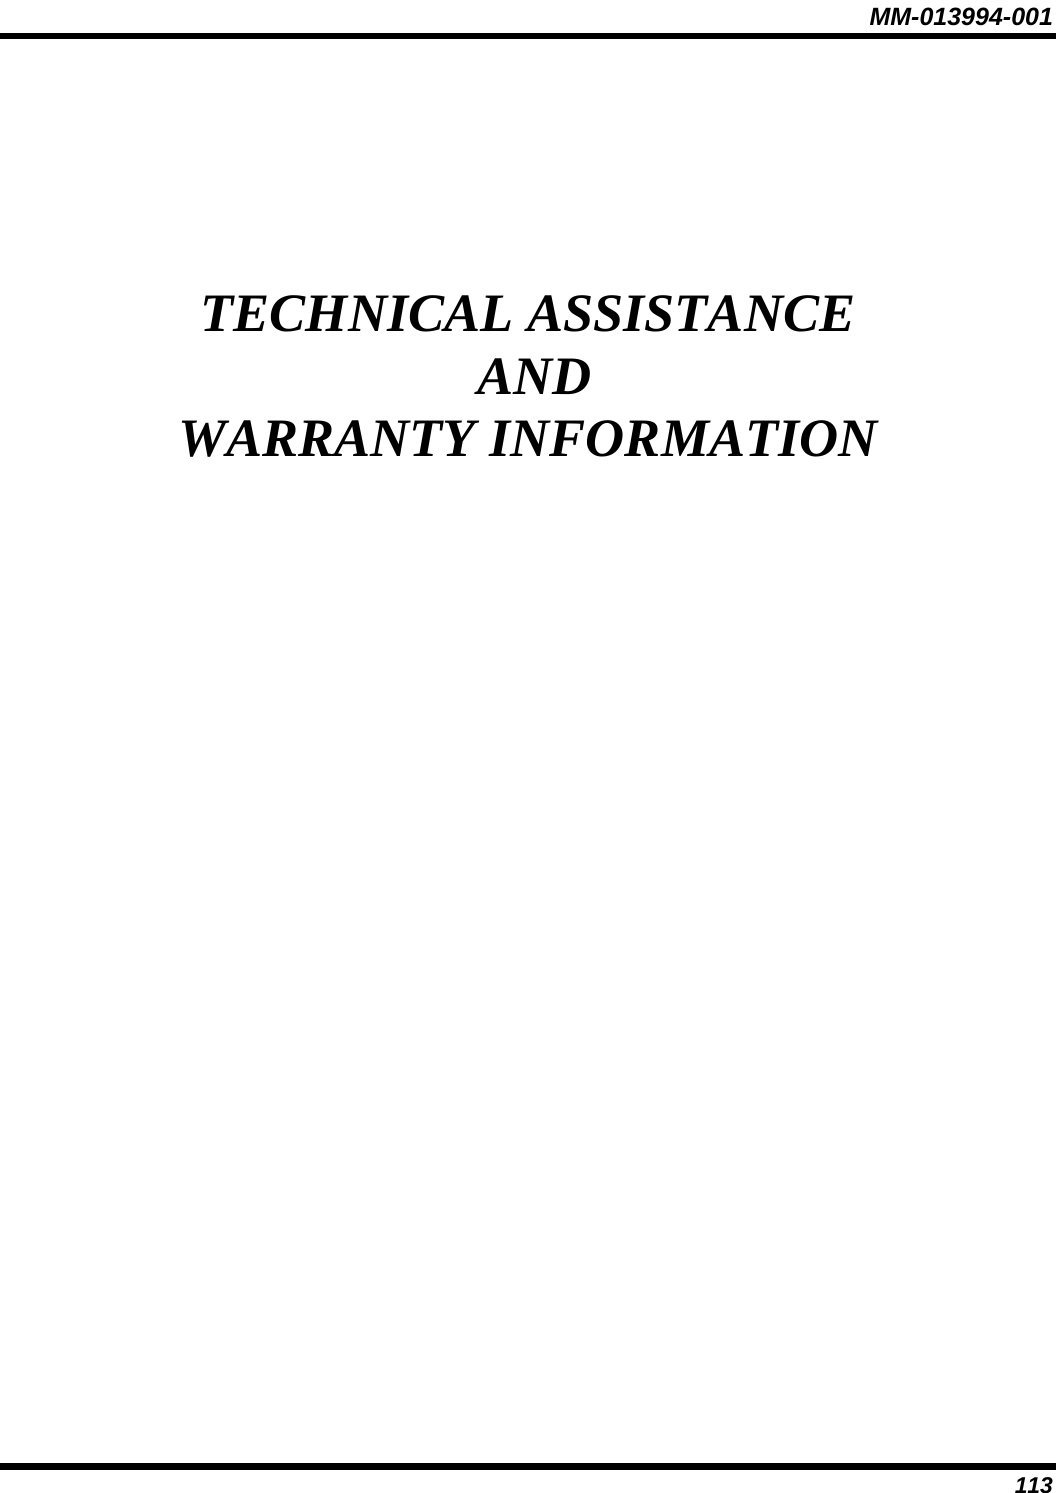 MM-013994-001 113 TECHNICAL ASSISTANCE  AND WARRANTY INFORMATION 